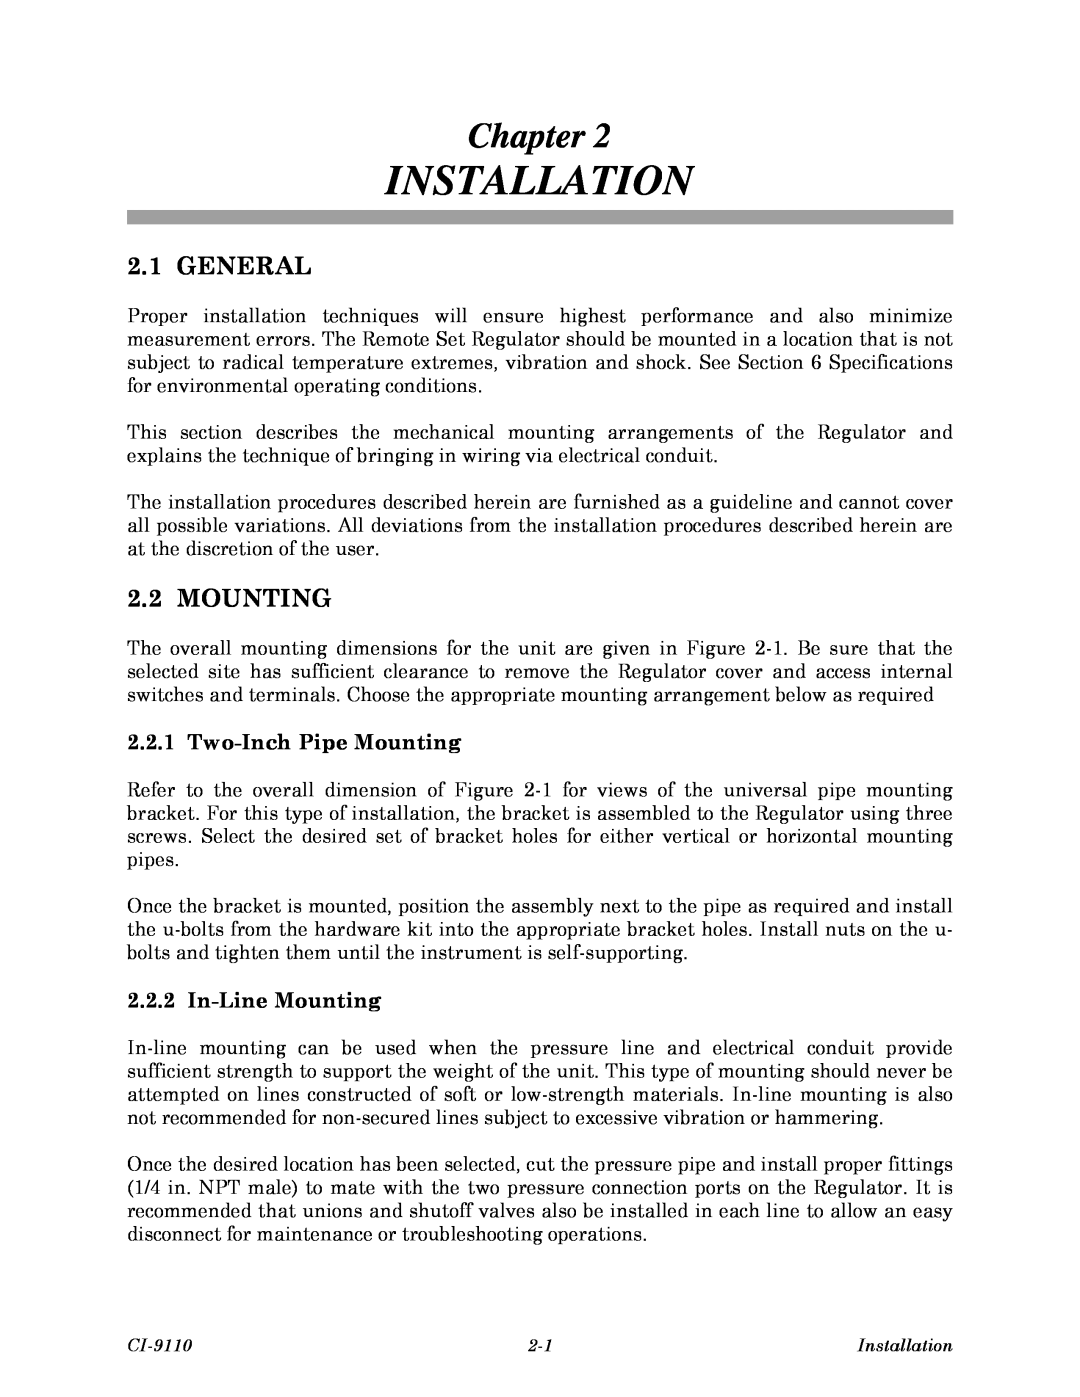 Emerson Process Management CI-9110, 9110-00A Installation, General, Two-Inch Pipe Mounting, In-Line Mounting, Chapter 